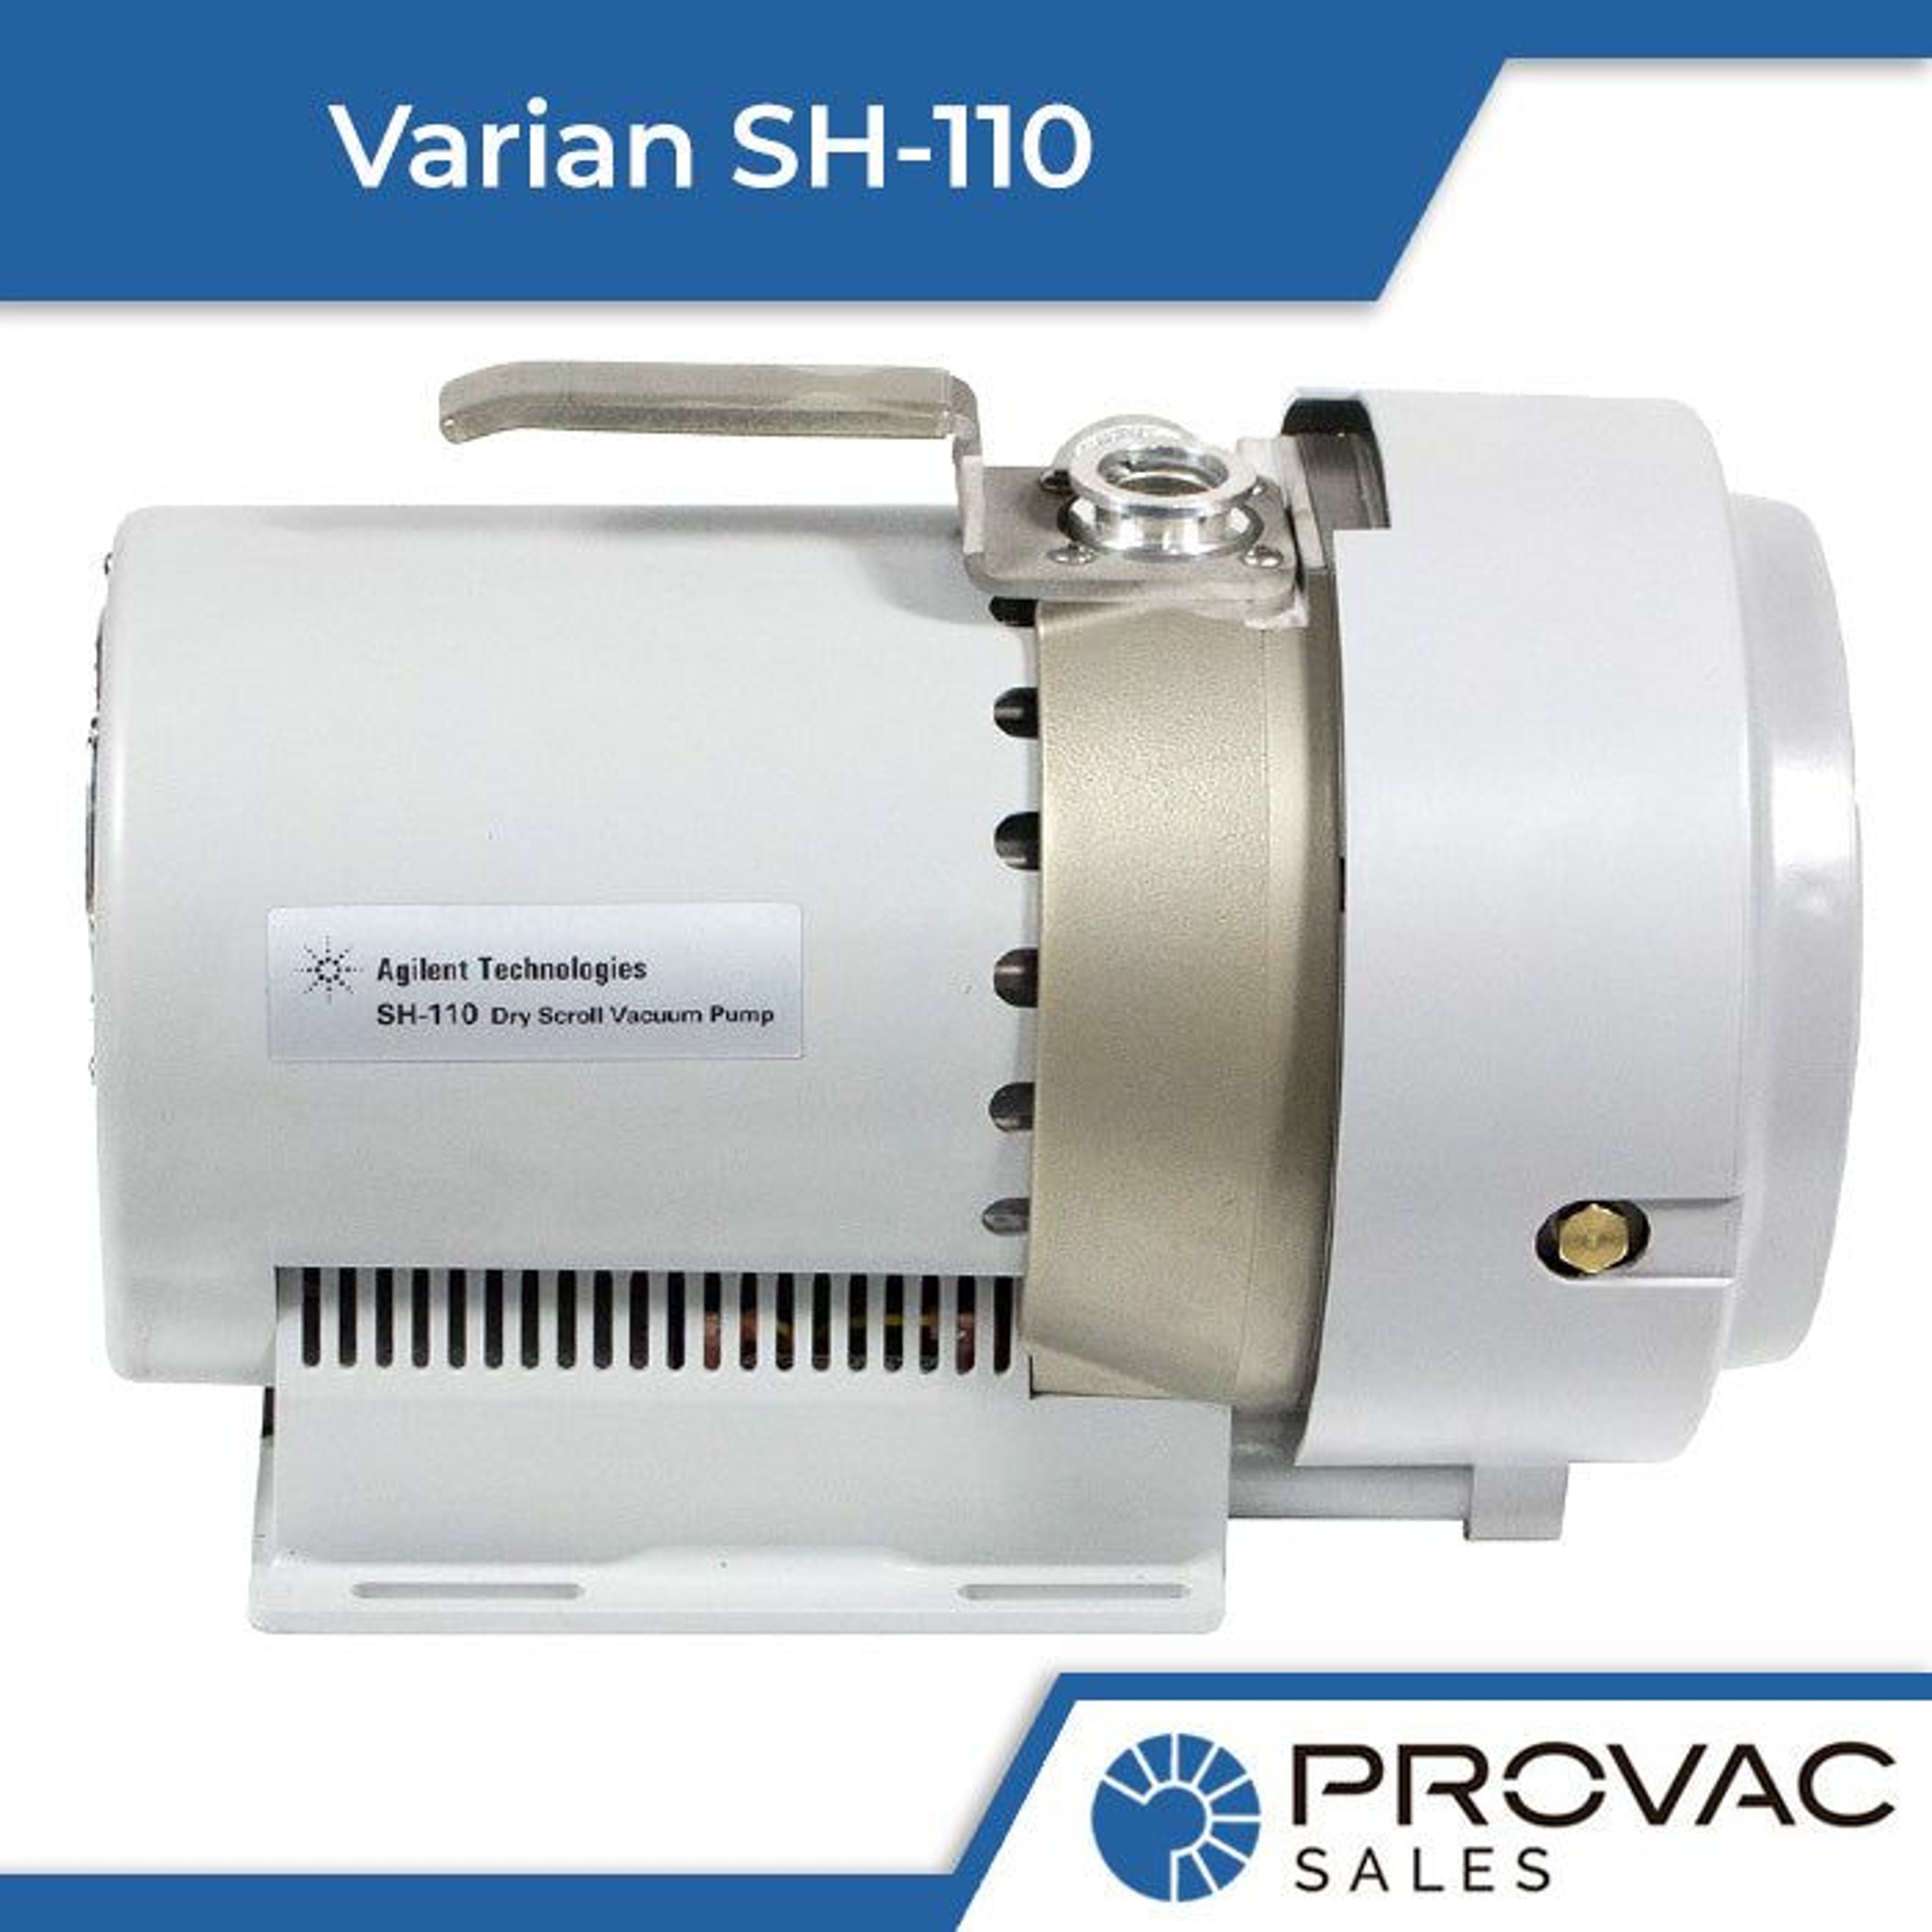 Varian SH-110 Scroll Pump: In Stock, Ready to Ship Background